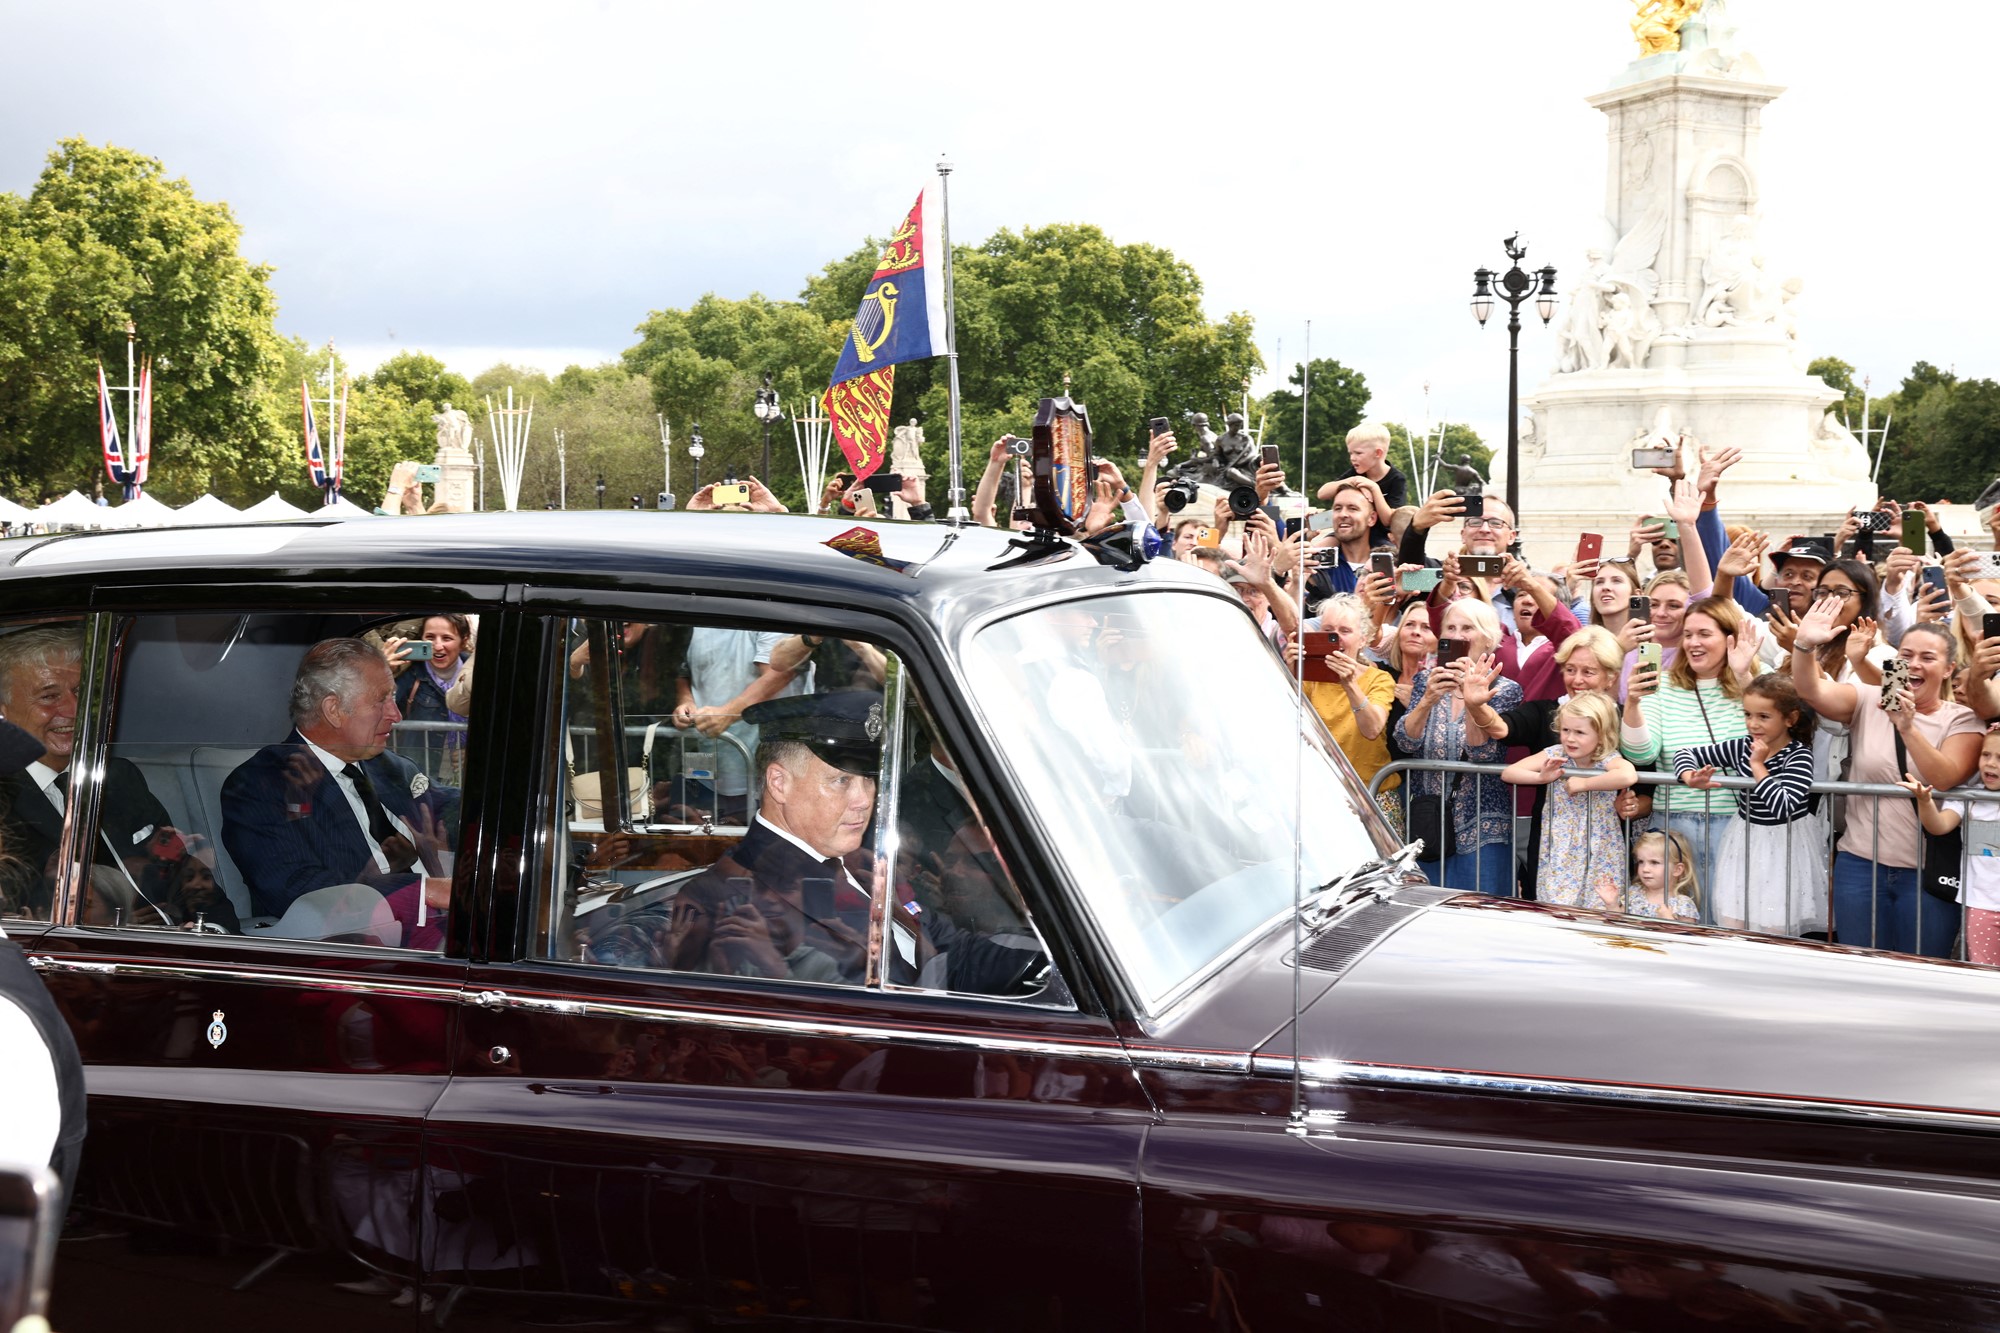 King Charles III greets supporters from a car as he arrives to Buckingham Palace